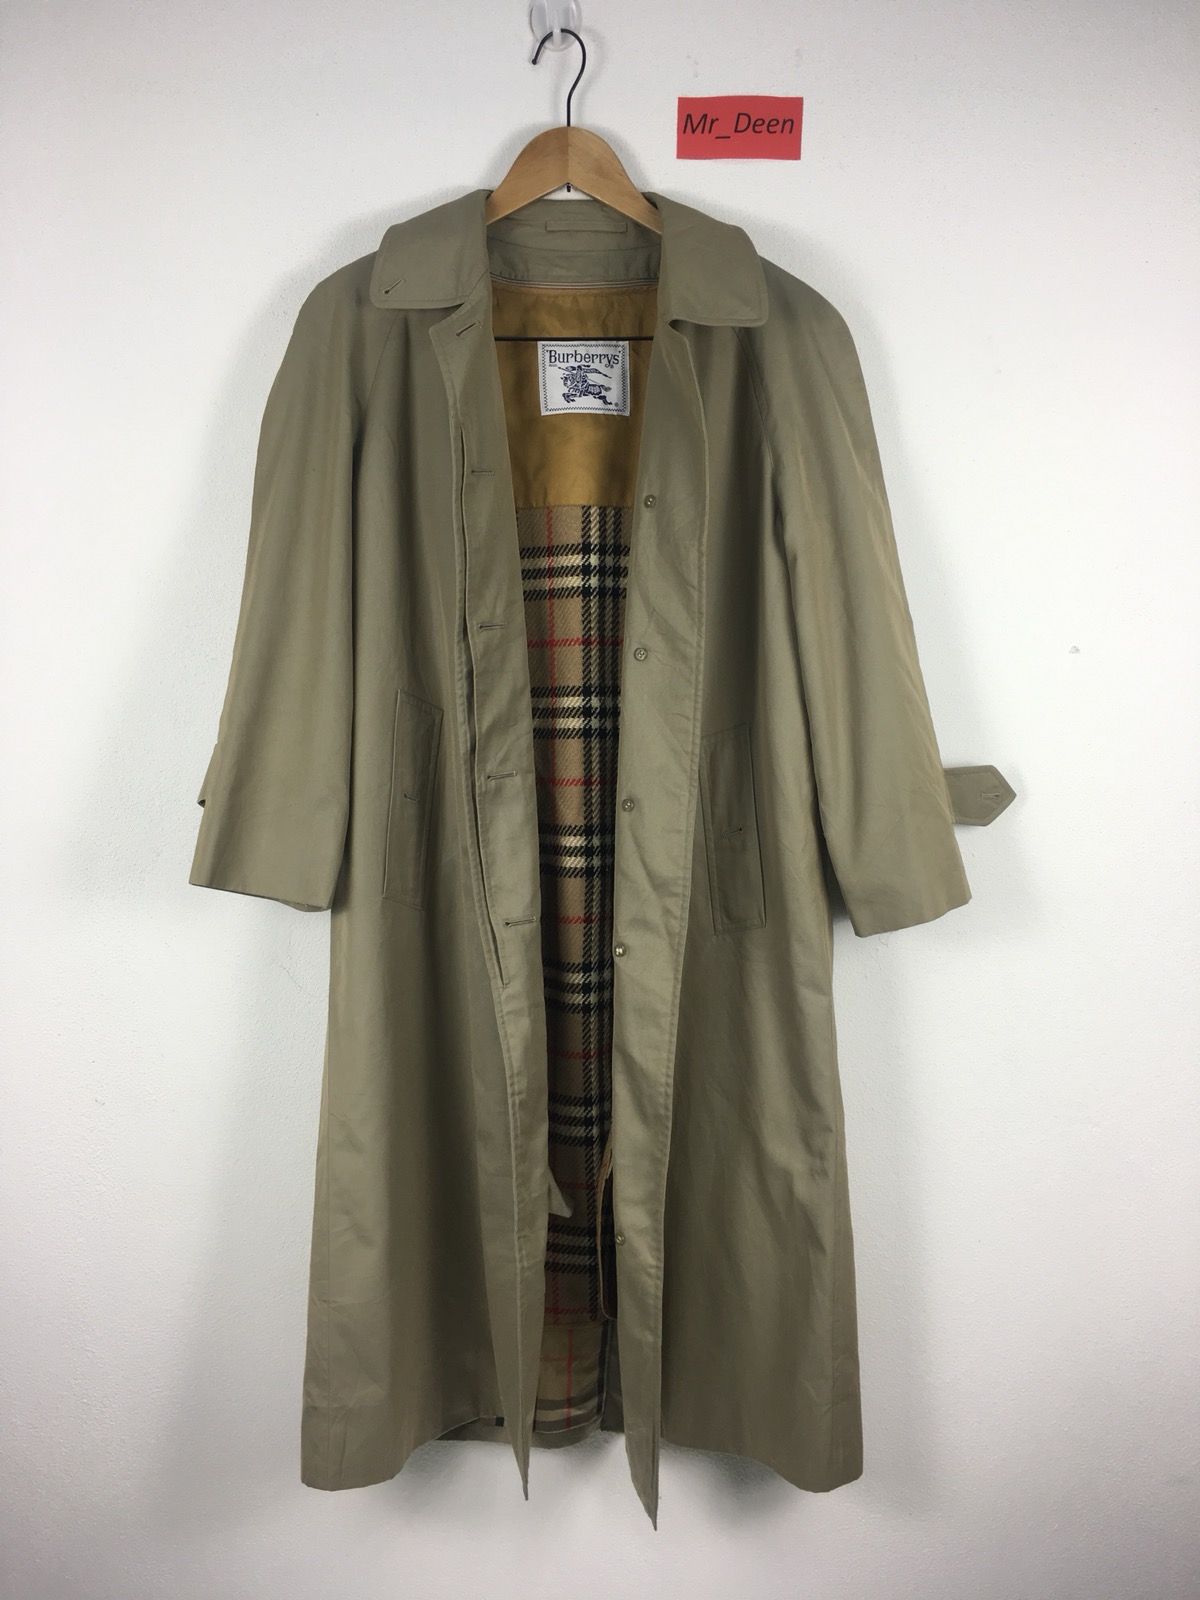 Burberry Burberrys Green Double Lining Wool Trench/ Long Coat | Grailed